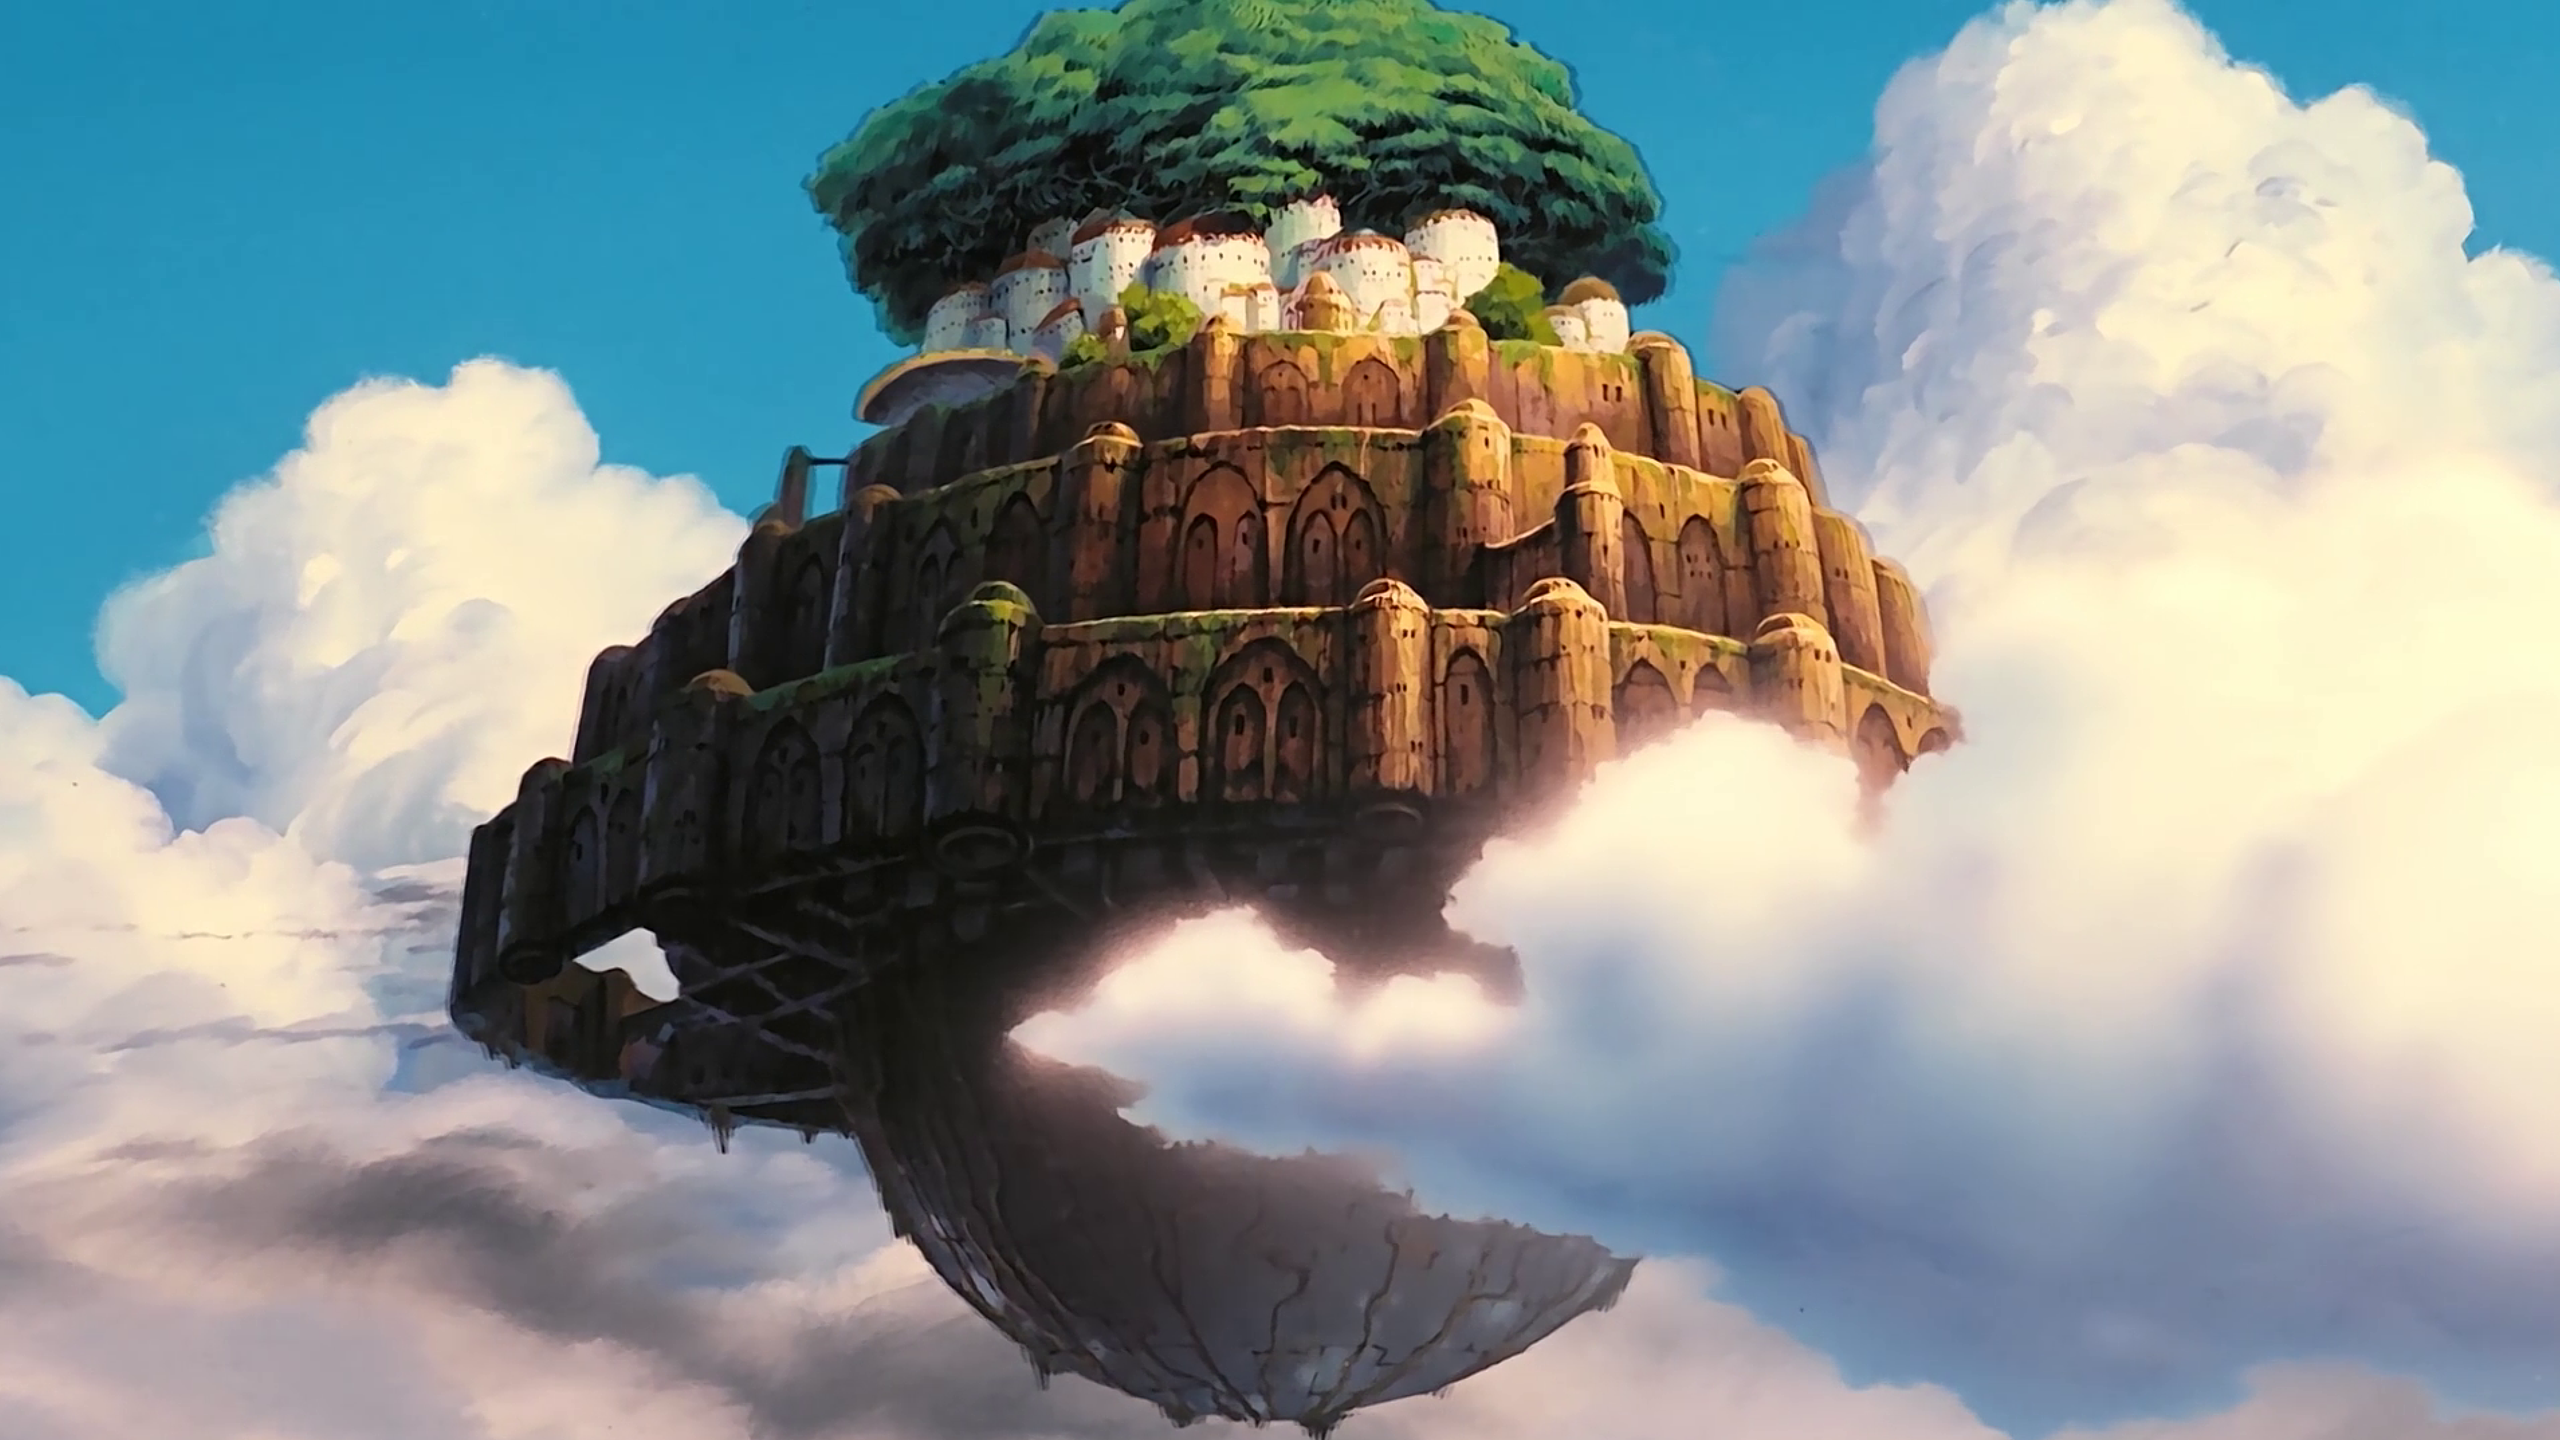 Have A Huge Collection Of 1440p Studio Ghibli Wallpaper Ment